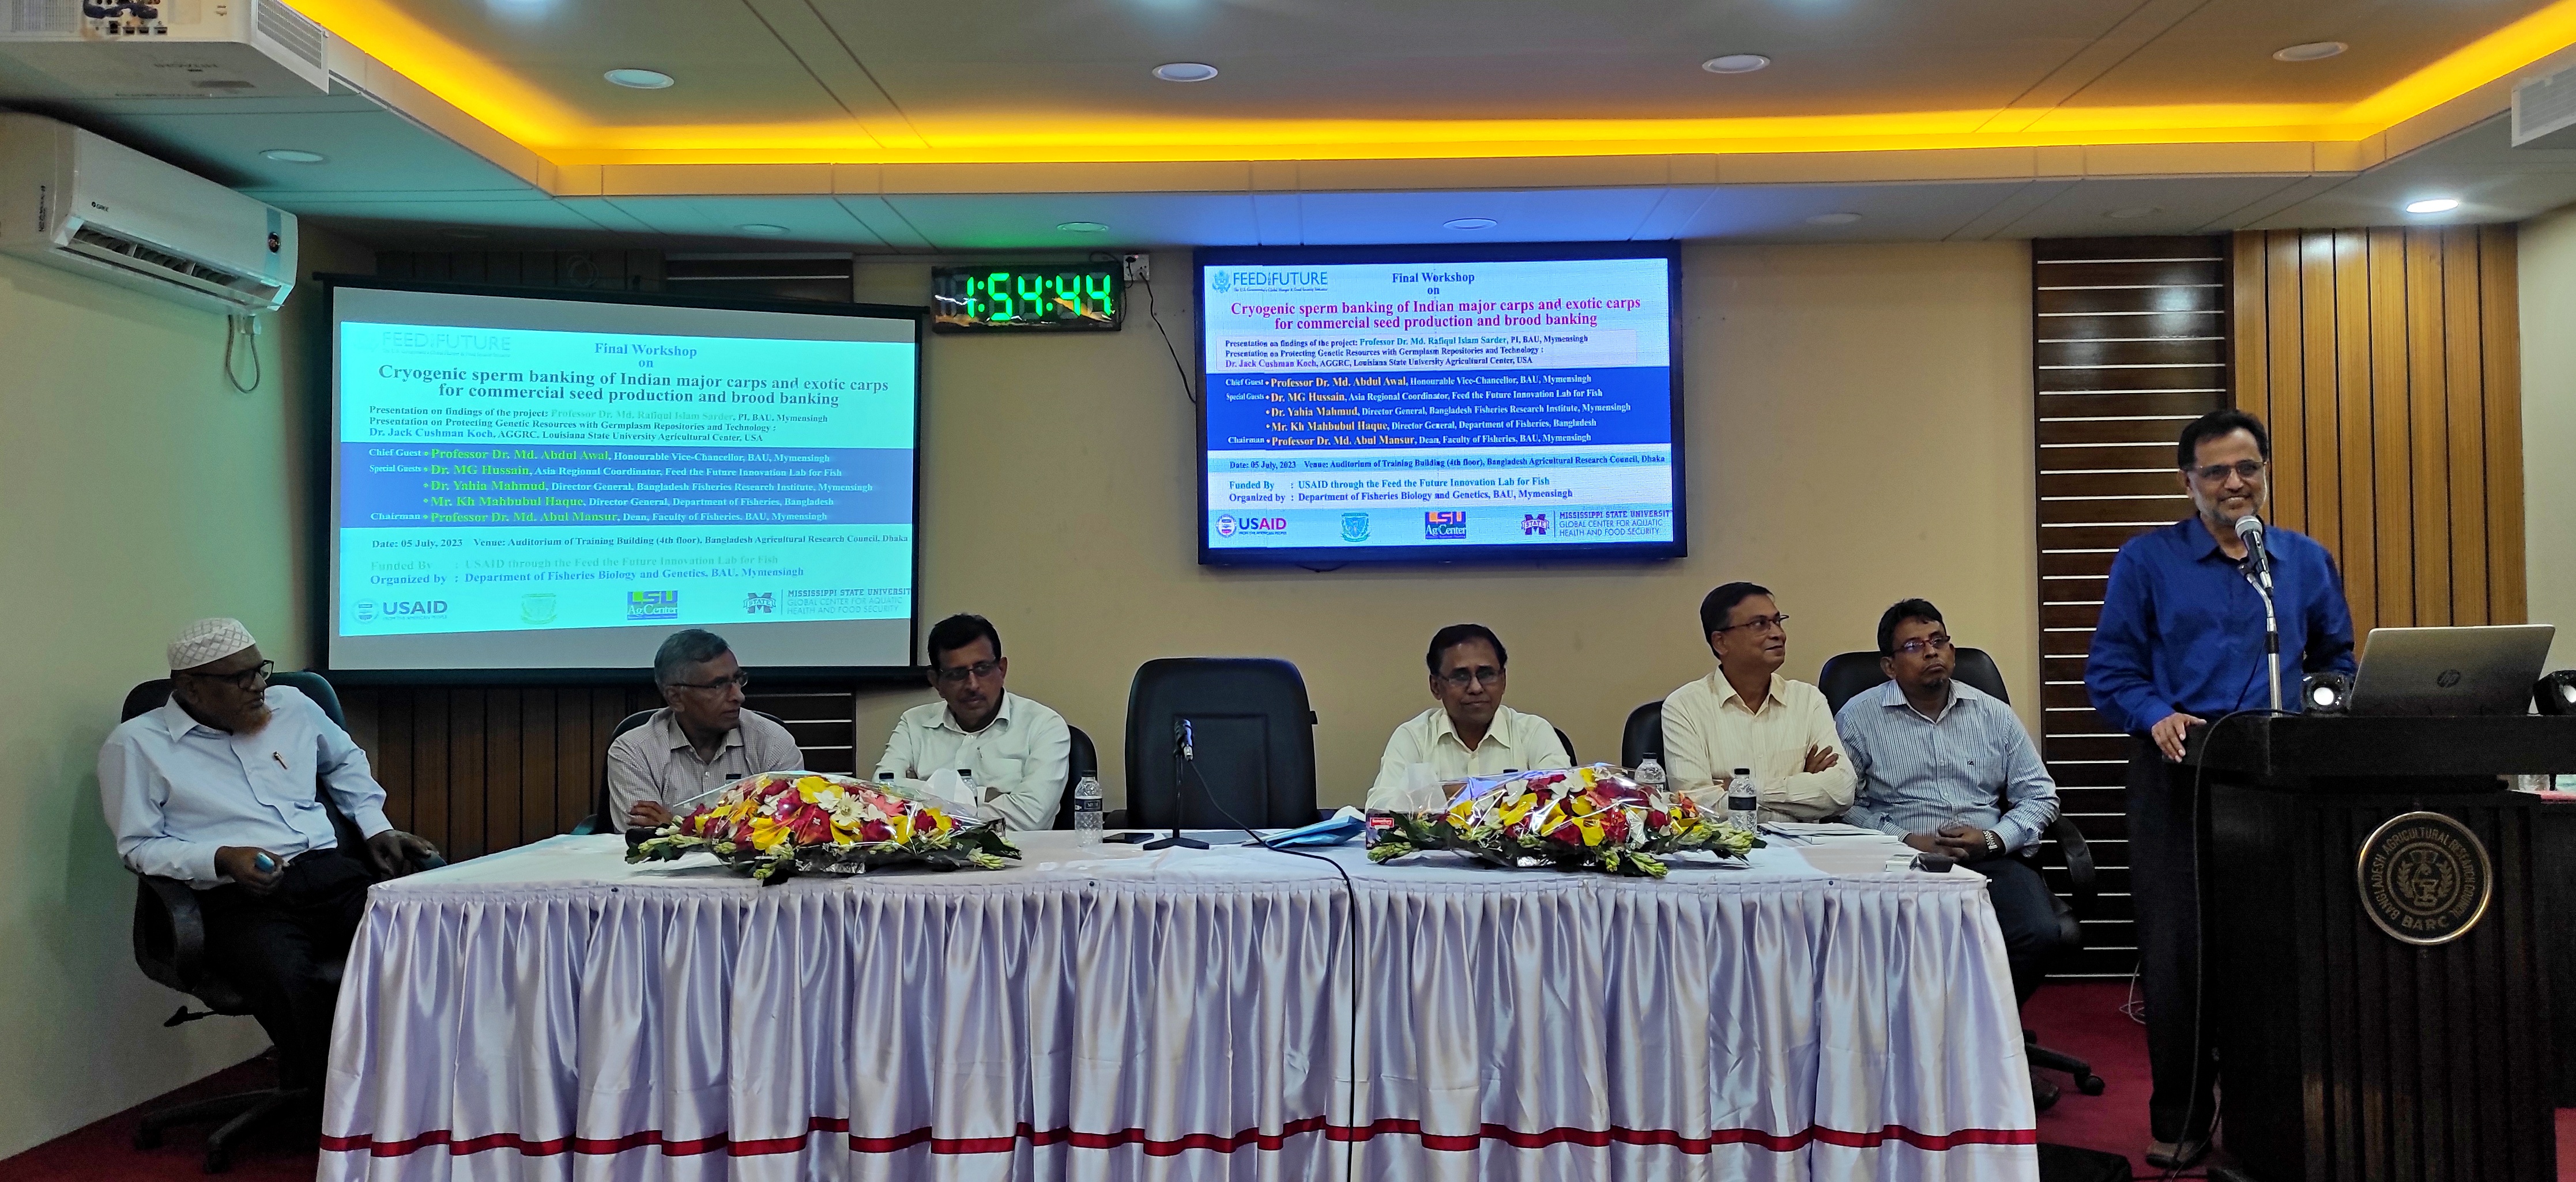 Md. Abdul Awal, vice-chancellor of BAU, addressing as the chief guest the of the final workshop on cryogenic sperm banking of Indian major carps and exotic in Dhaka, Bangladesh.